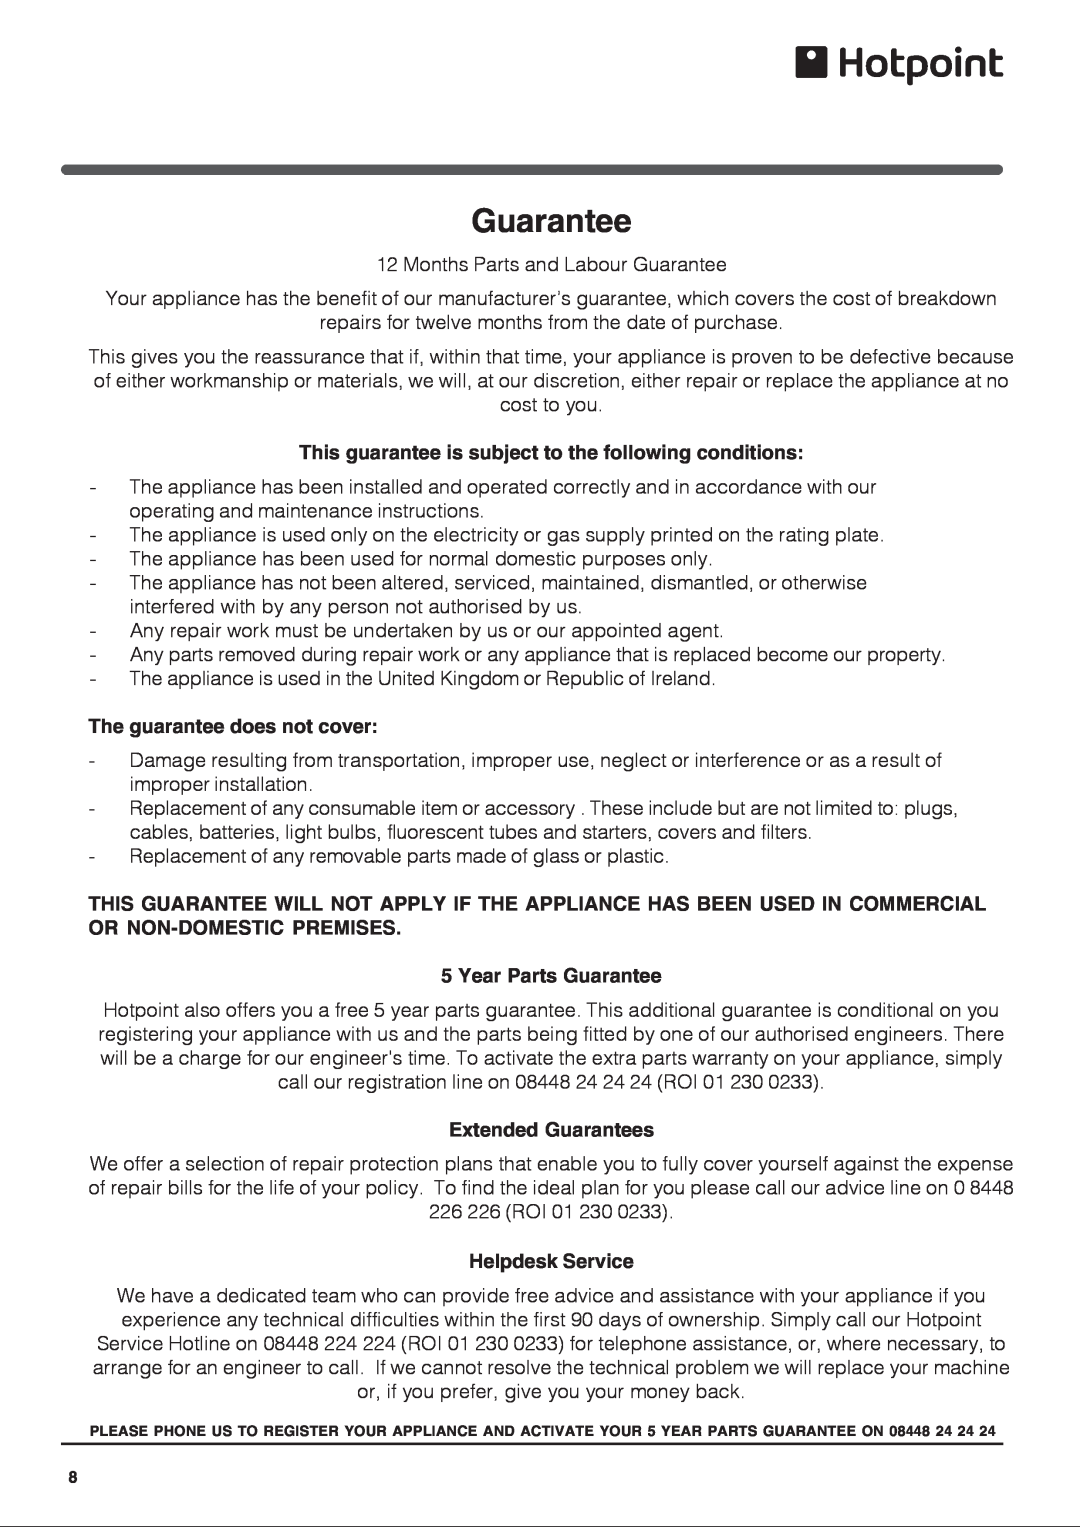 Hotpoint HS2322L manual Guarantee, This guarantee is subject to the following conditions, The guarantee does not cover 